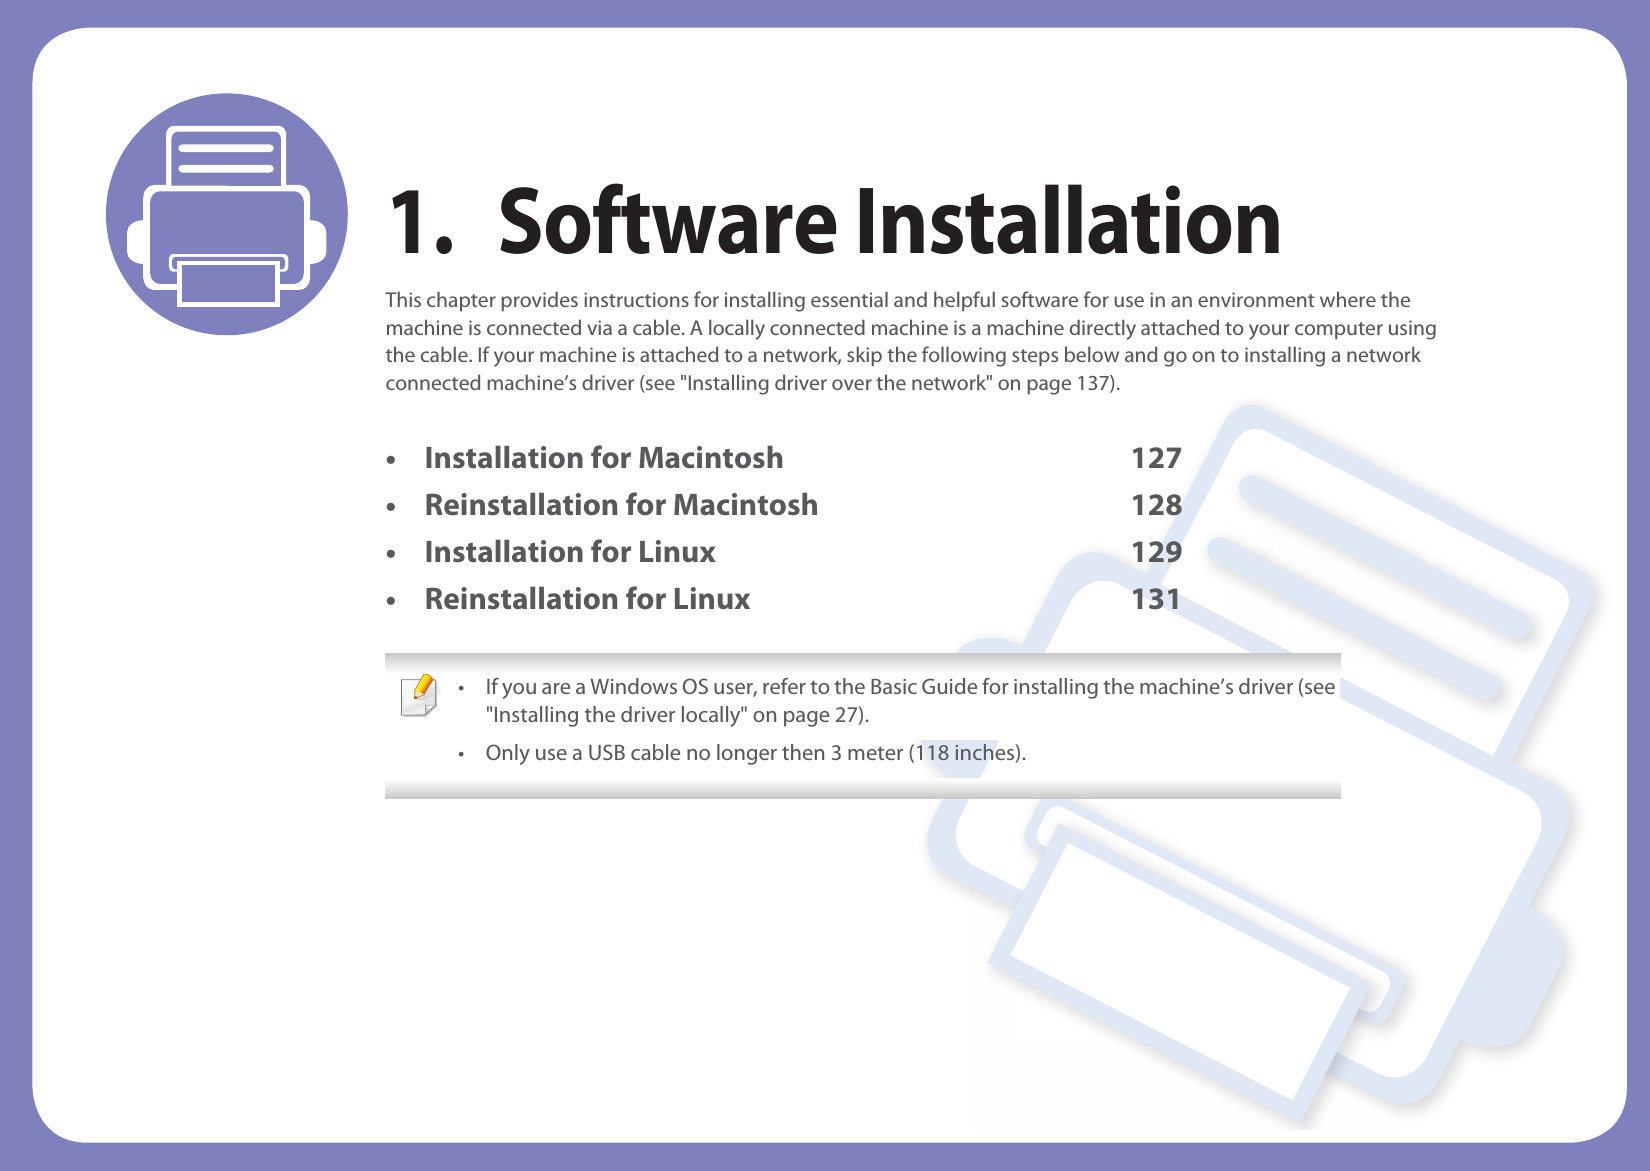 1. Software InstallationThis chapter provides instructions for installing essential and helpful software for use in an environment where the machine is connected via a cable. A locally connected machine is a machine directly attached to your computer using the cable. If your machine is attached to a network, skip the following steps below and go on to installing a network connected machine’s driver (see &quot;Installing driver over the network&quot; on page 137).• Installation for Macintosh 127• Reinstallation for Macintosh 128• Installation for Linux 129• Reinstallation for Linux 131 • If you are a Windows OS user, refer to the Basic Guide for installing the machine’s driver (see &quot;Installing the driver locally&quot; on page 27).• Only use a USB cable no longer then 3 meter (118 inches). 